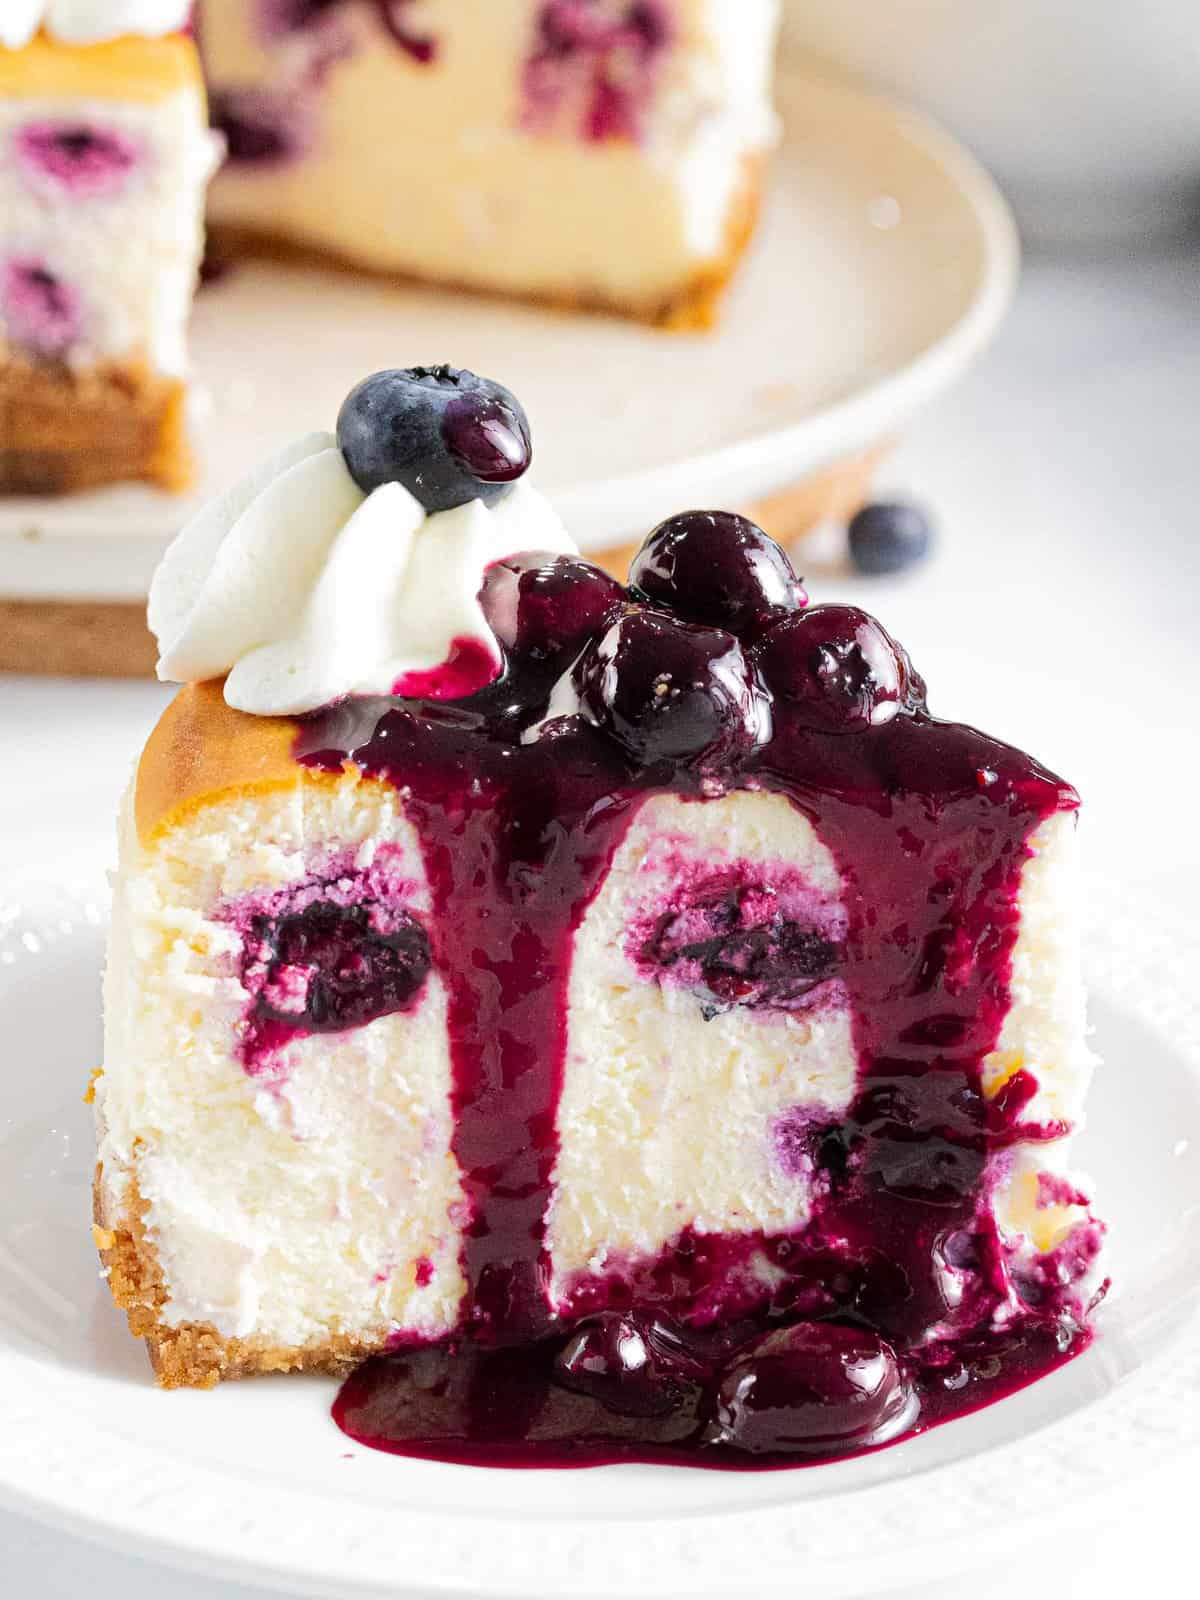 Blueberry cheesecake topped with homemade blueberry sauce.